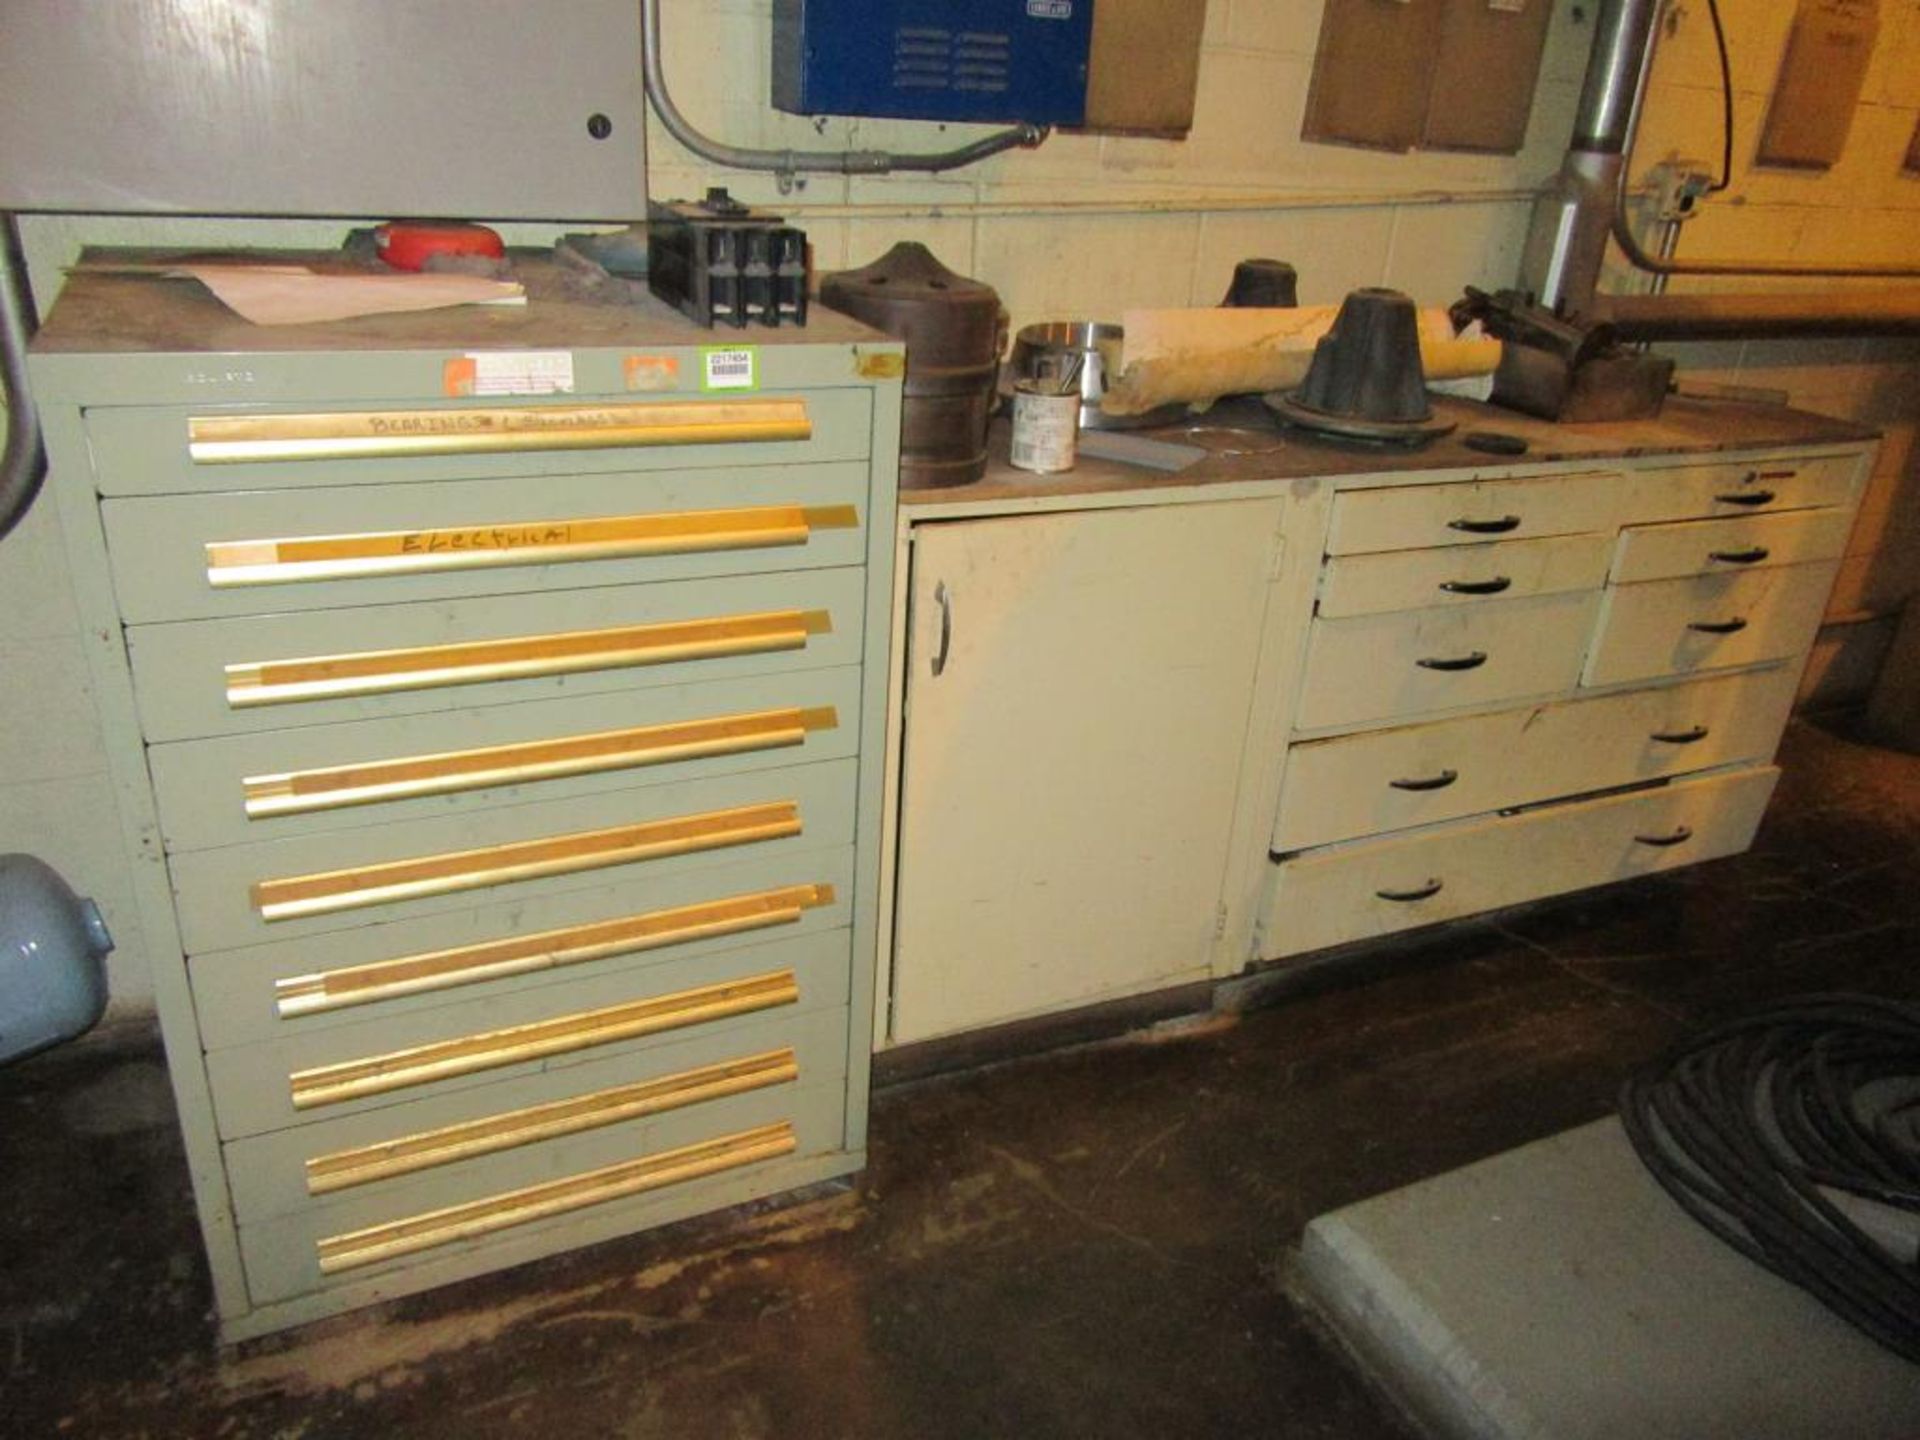 Parts Cabinet; Lot: (2 Items), Consisting of: (1) Equipto 9-Drawer Parts Cabinet 44"H x 30"L x 28"W